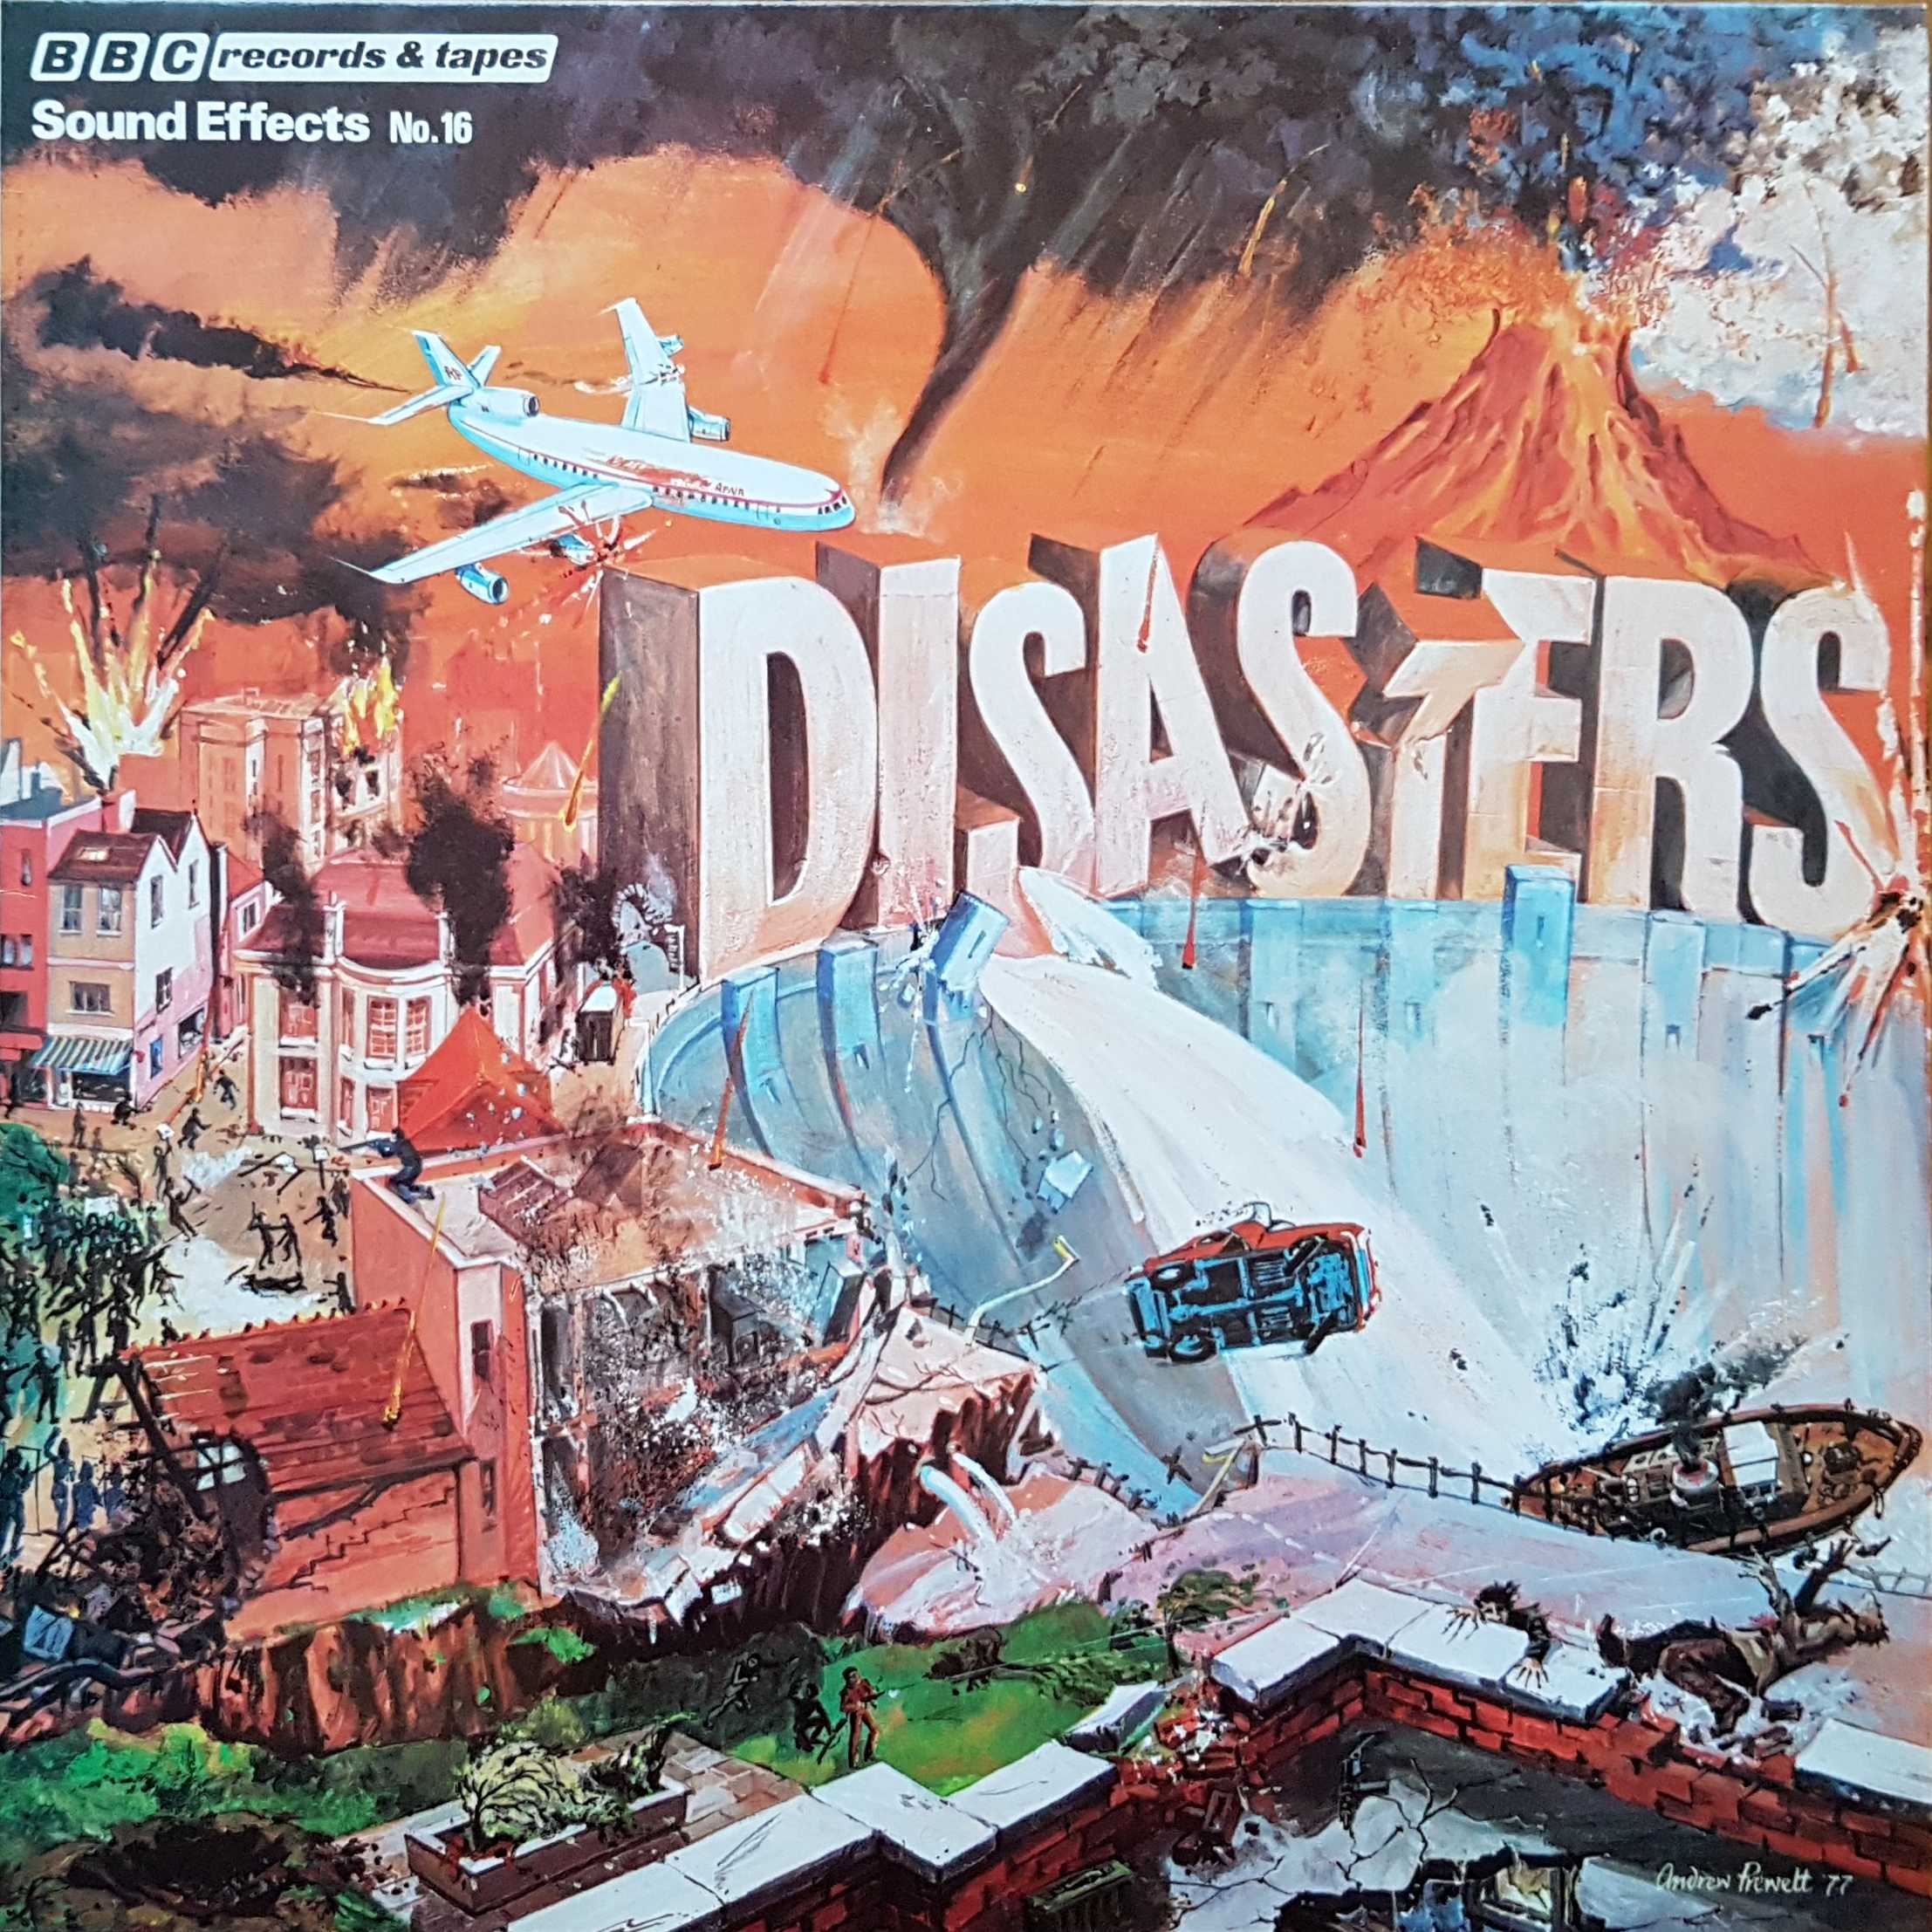 Picture of REC 295 Disasters (Sound effects no. 16) by artist Various from the BBC albums - Records and Tapes library